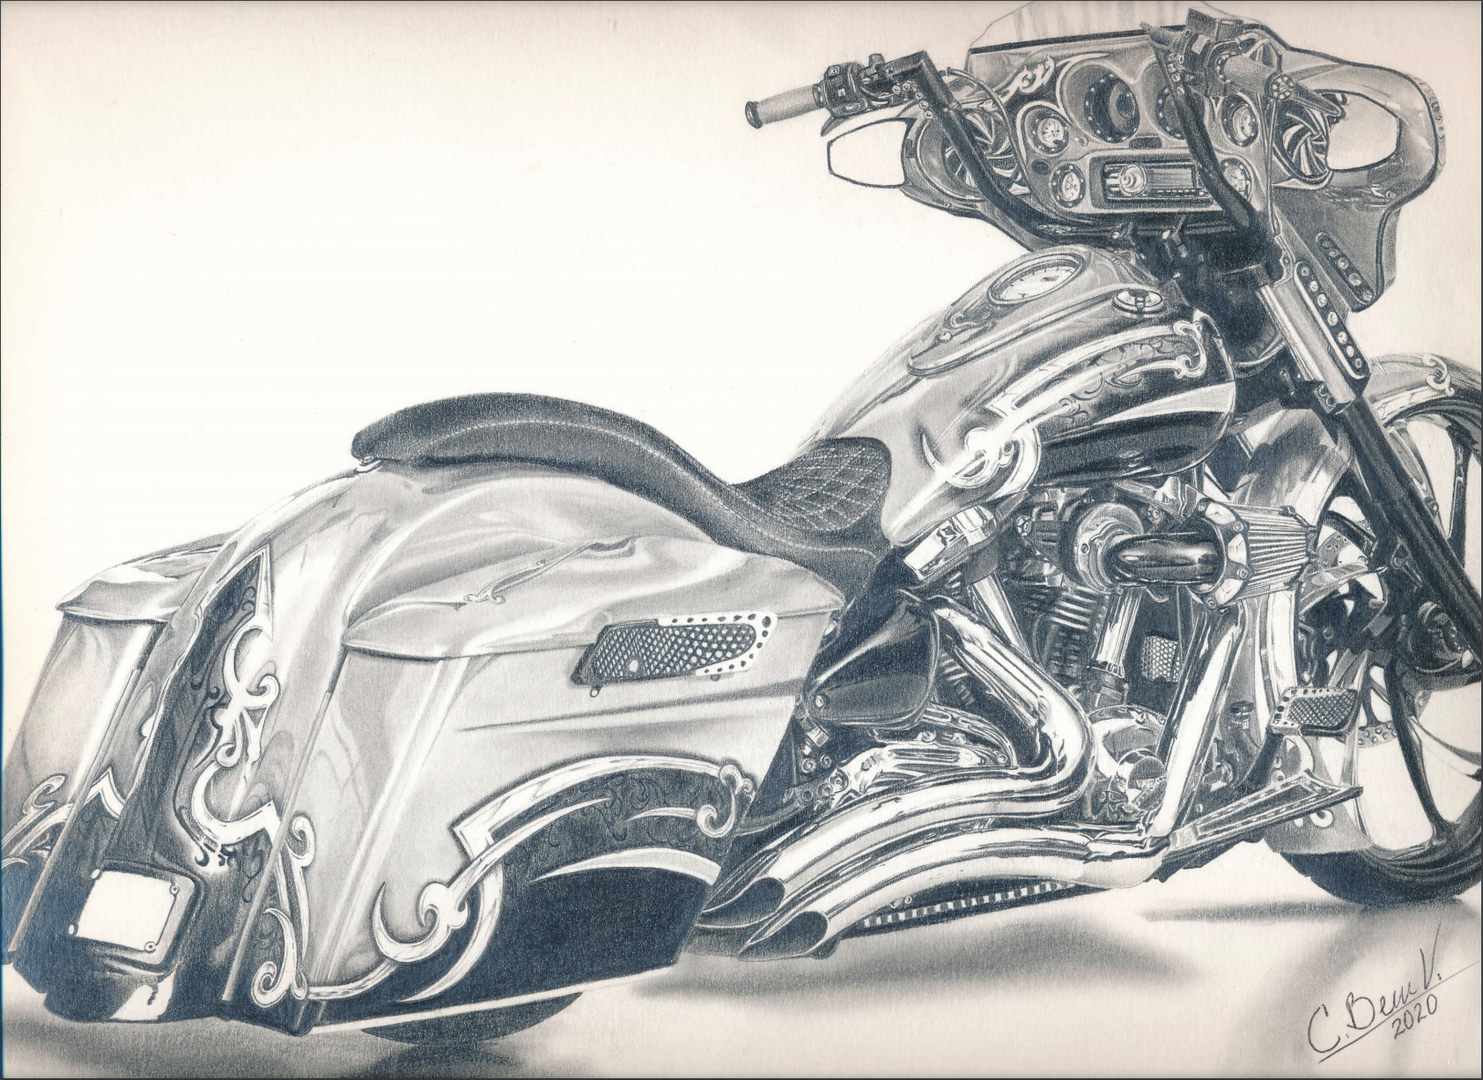 Pen drawing of a three quarters view of a Harley motorcycle